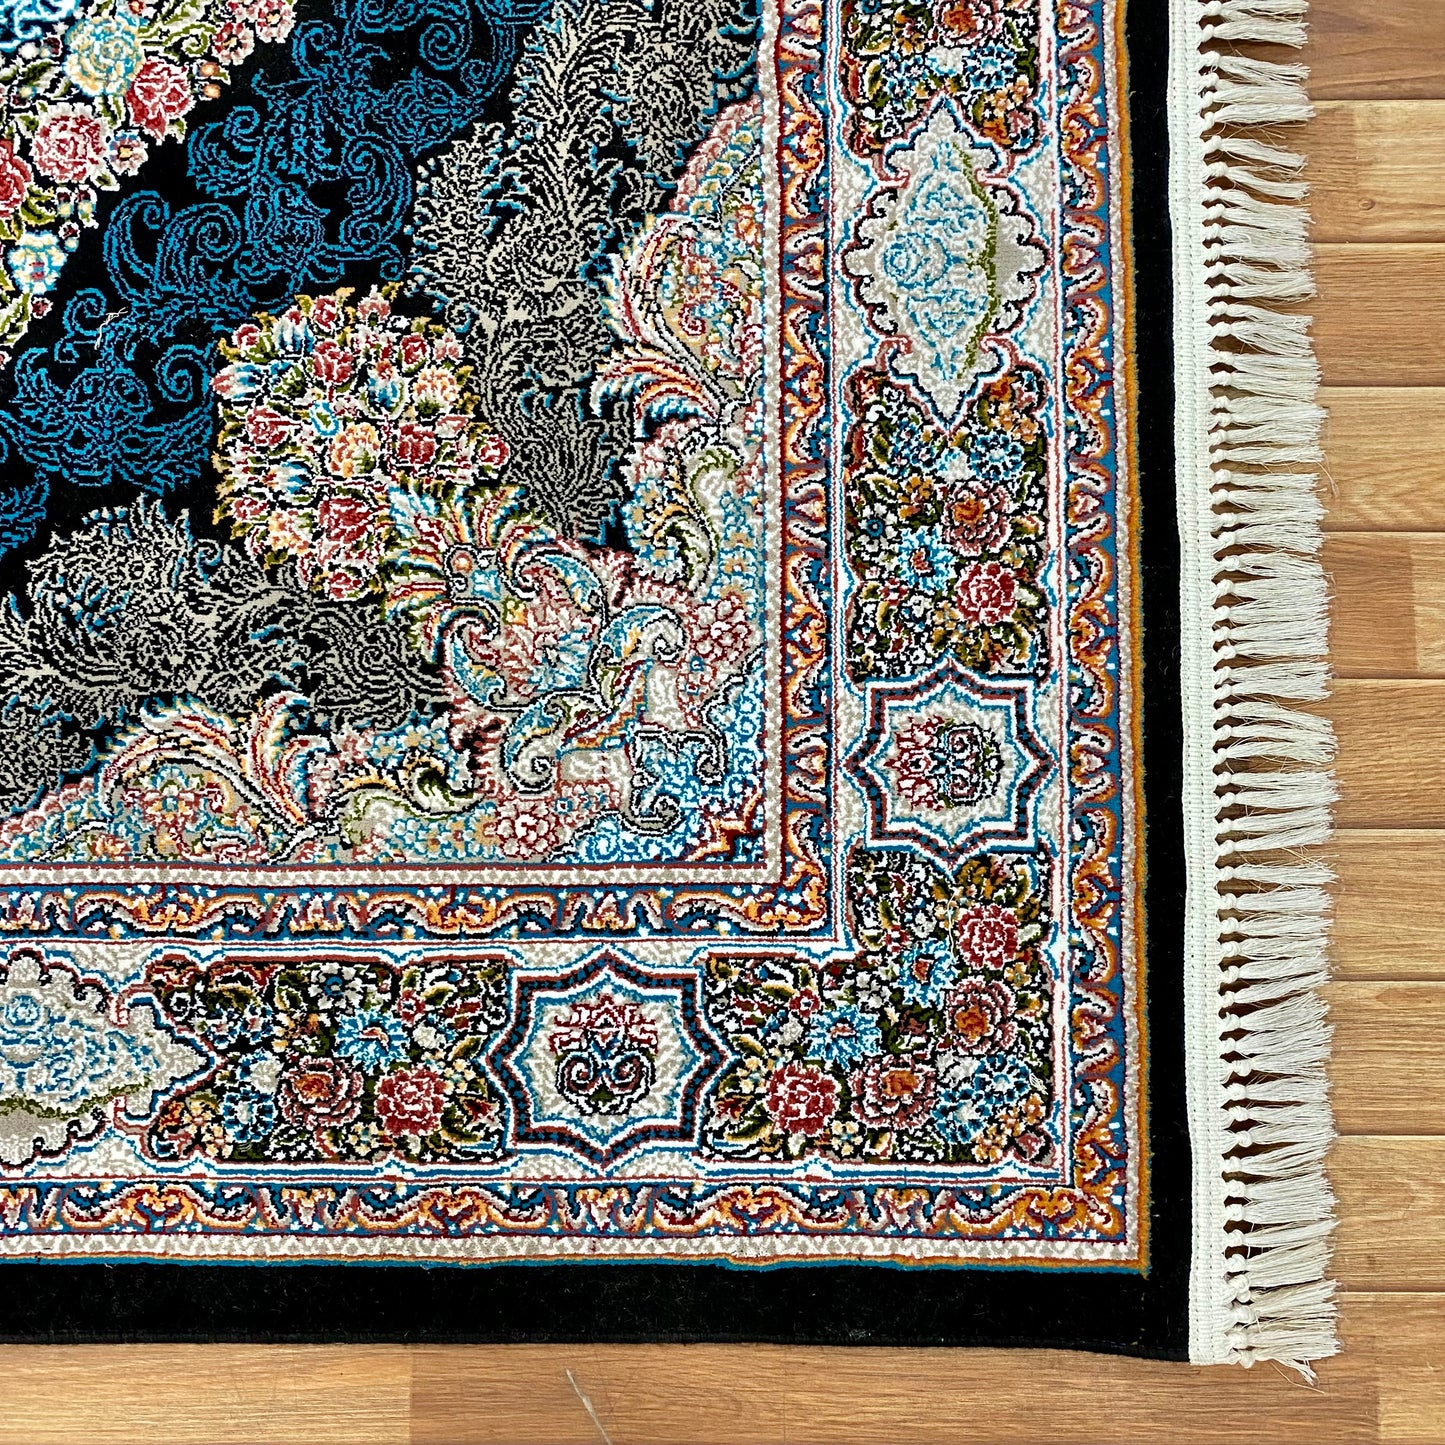 7 ft x 10 ft - Area Rug - 700 Reeds - Farsh e Farhang 2 - Black and Blue - Superior Comfort Elegant and Luxury Style Accent